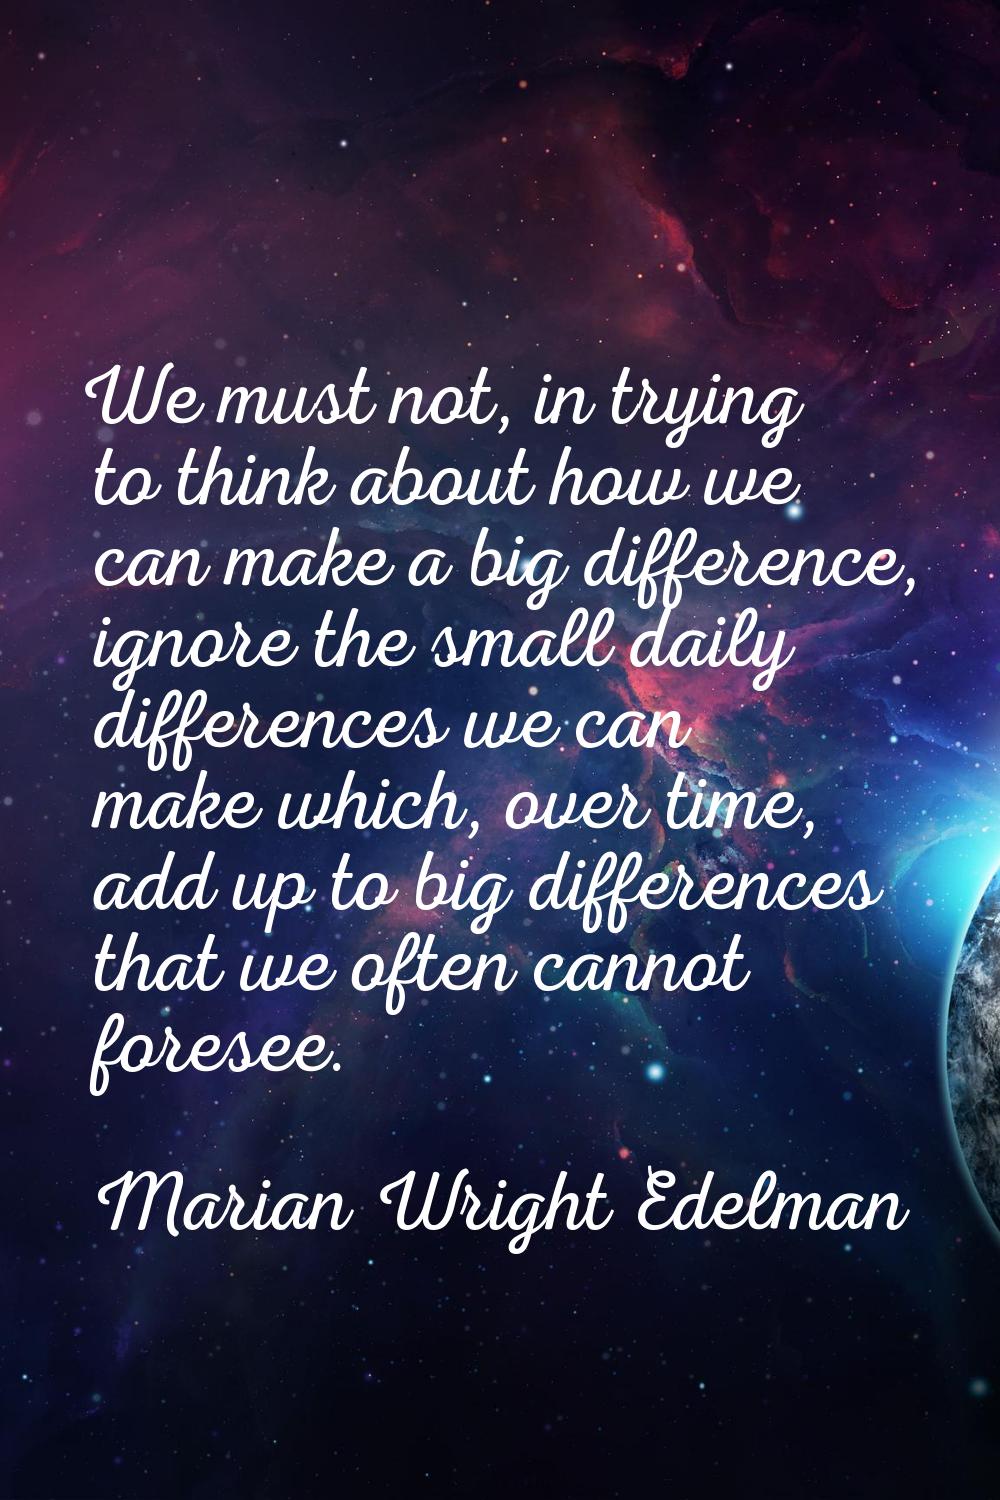 We must not, in trying to think about how we can make a big difference, ignore the small daily diff